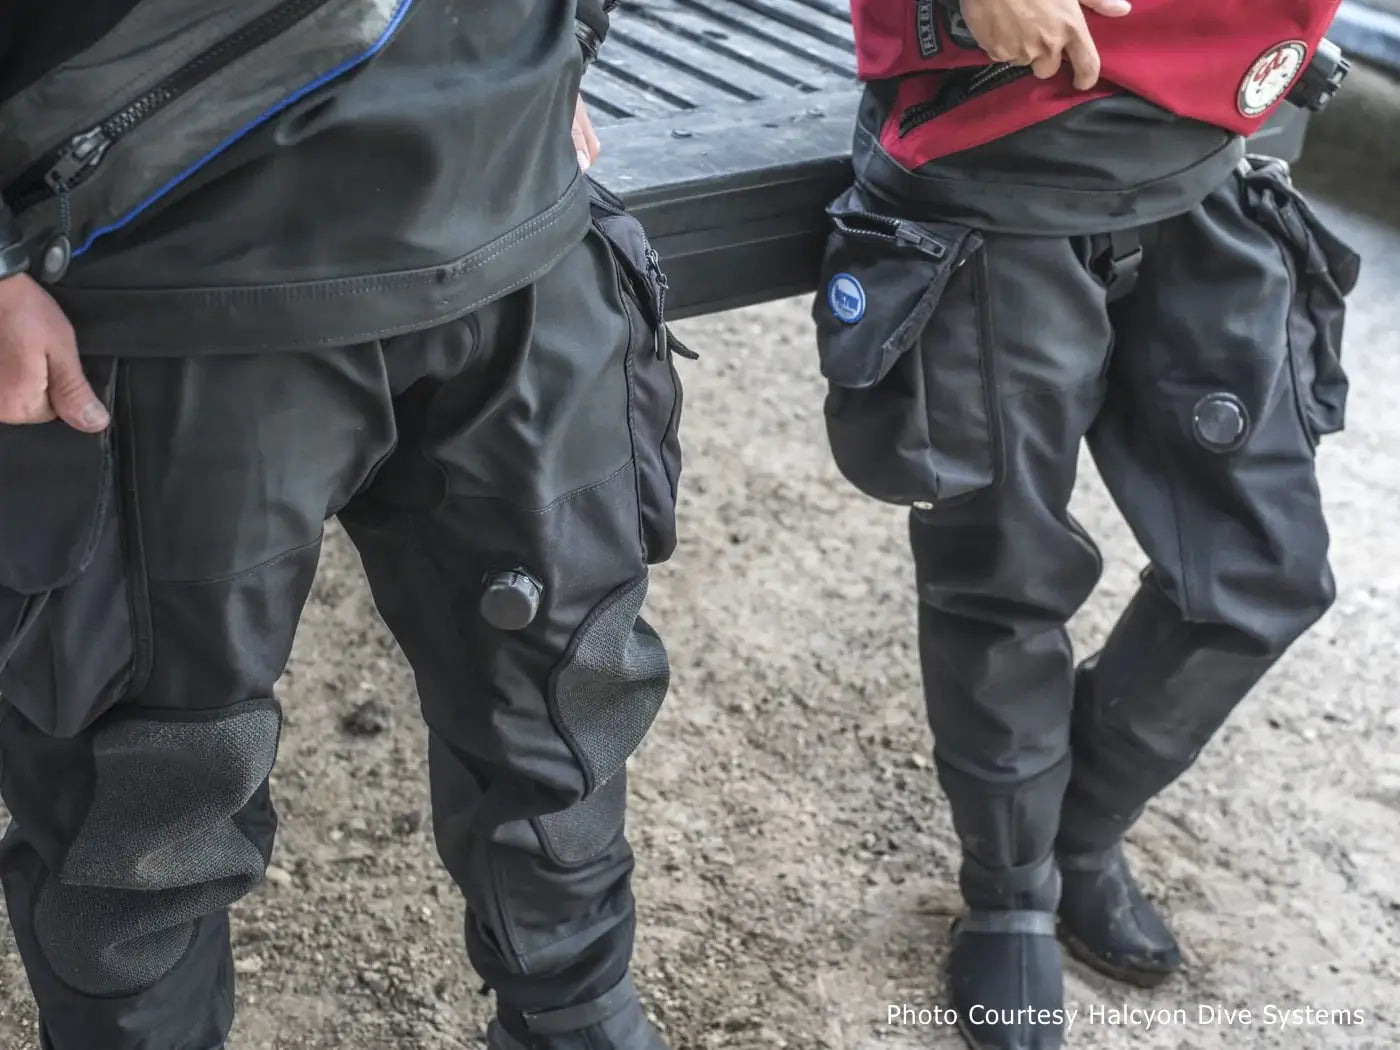 Drysuit divers walking with P-valves on legs